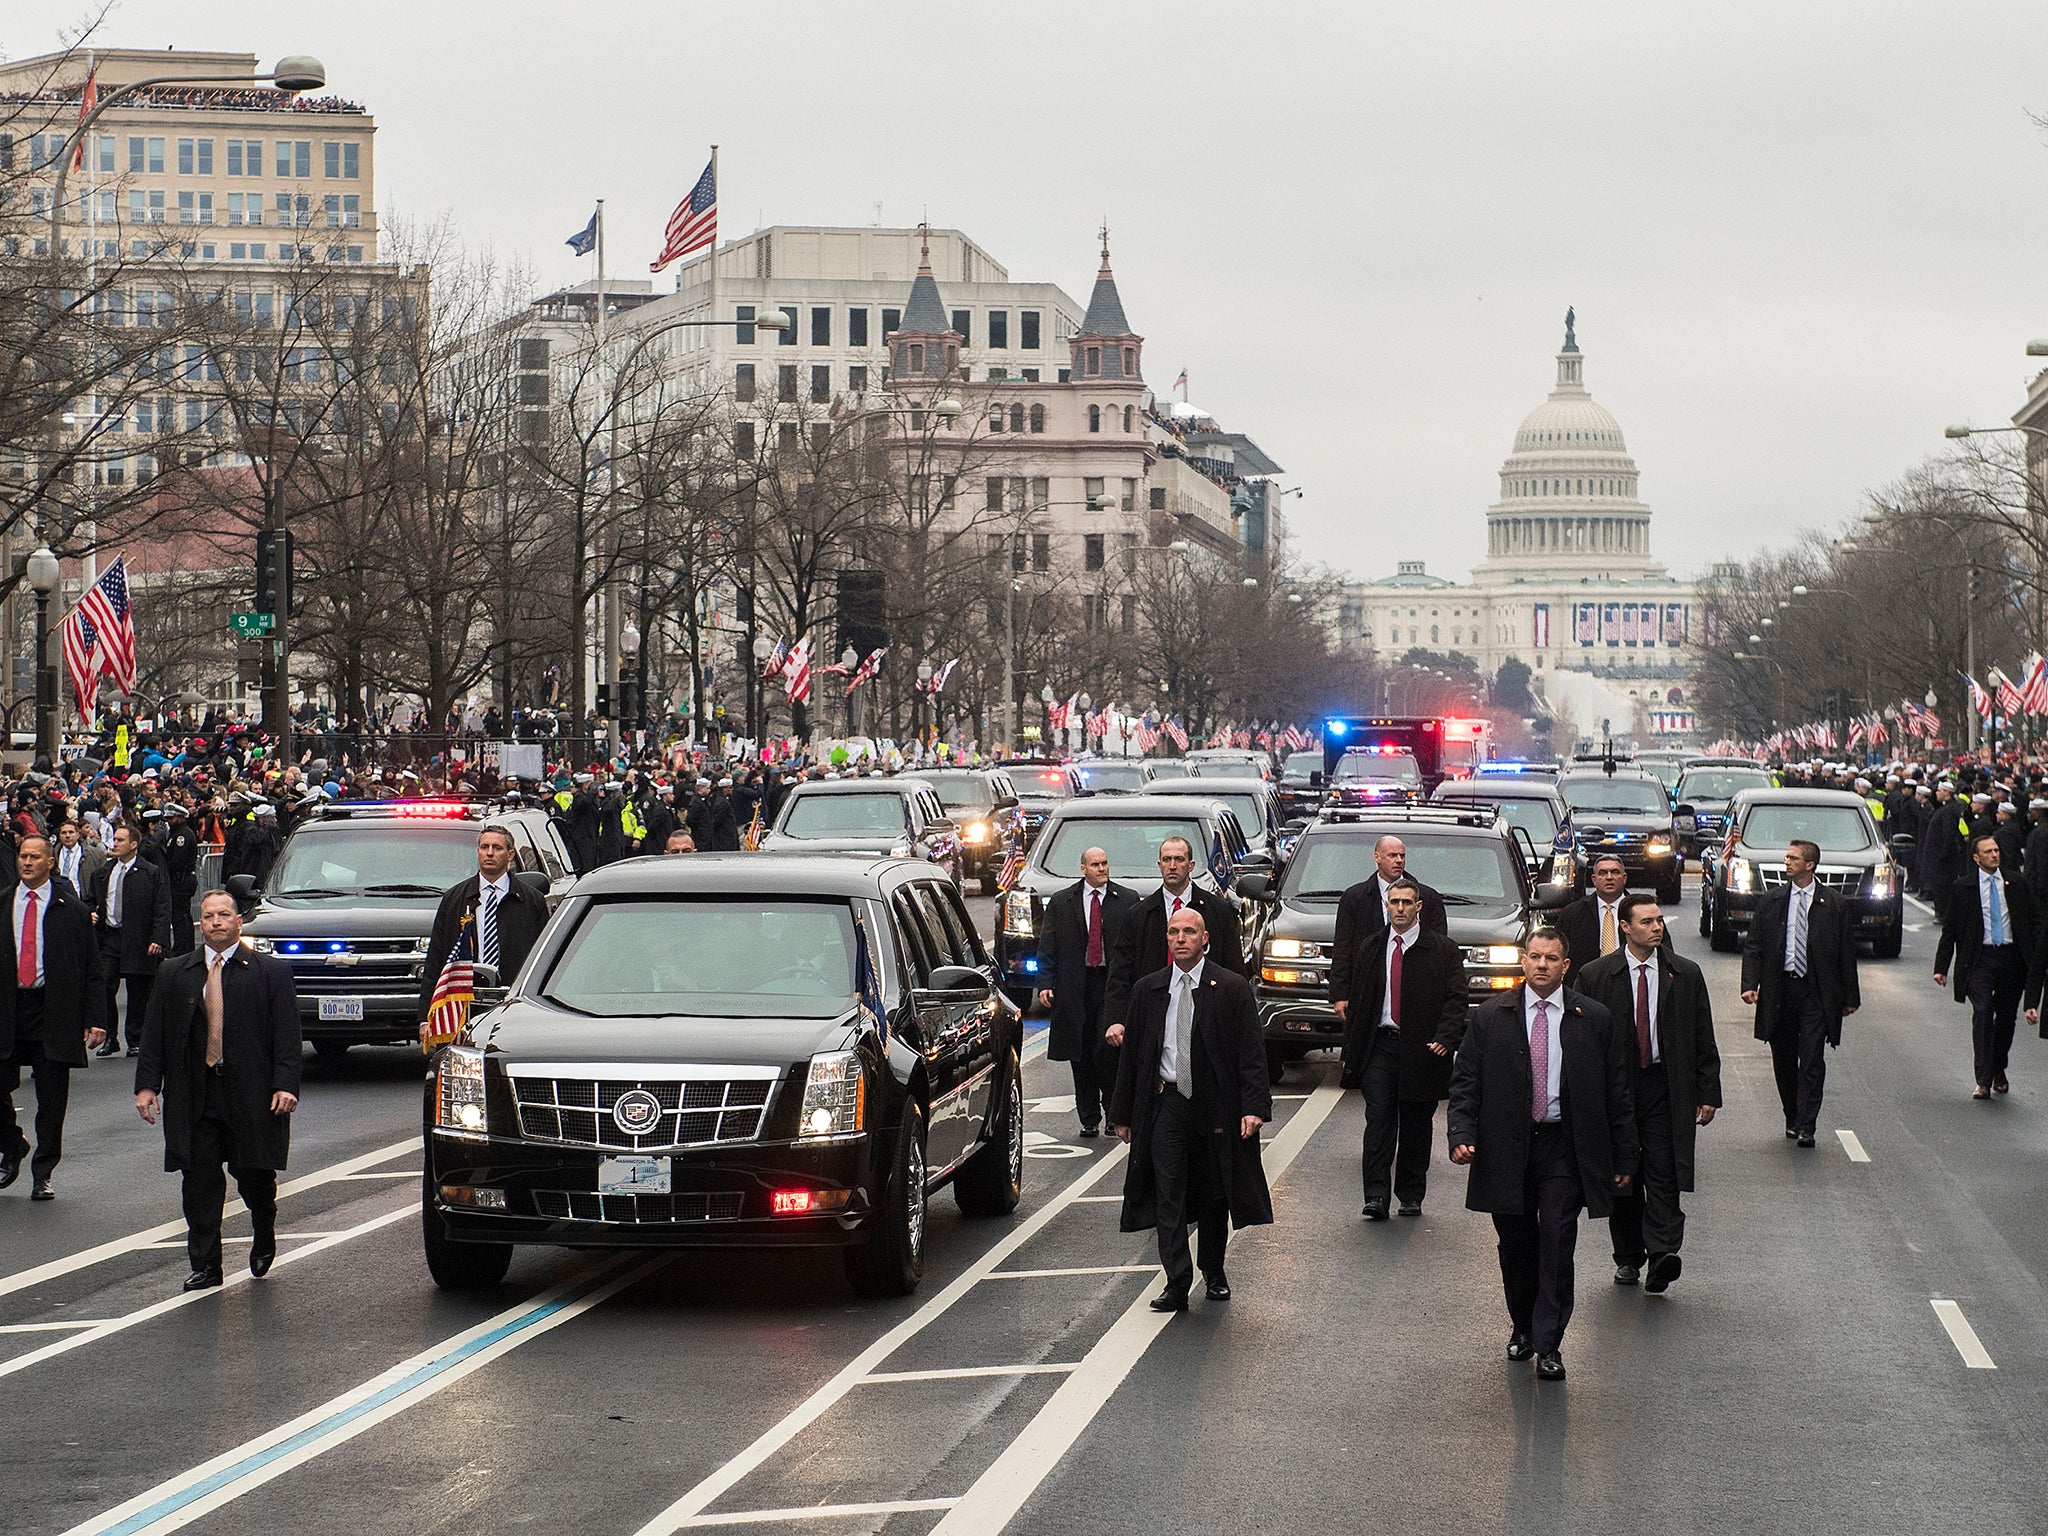 Secret services are investigating after an object was thrown at one of the vehicles in Donald Trump's motorcade